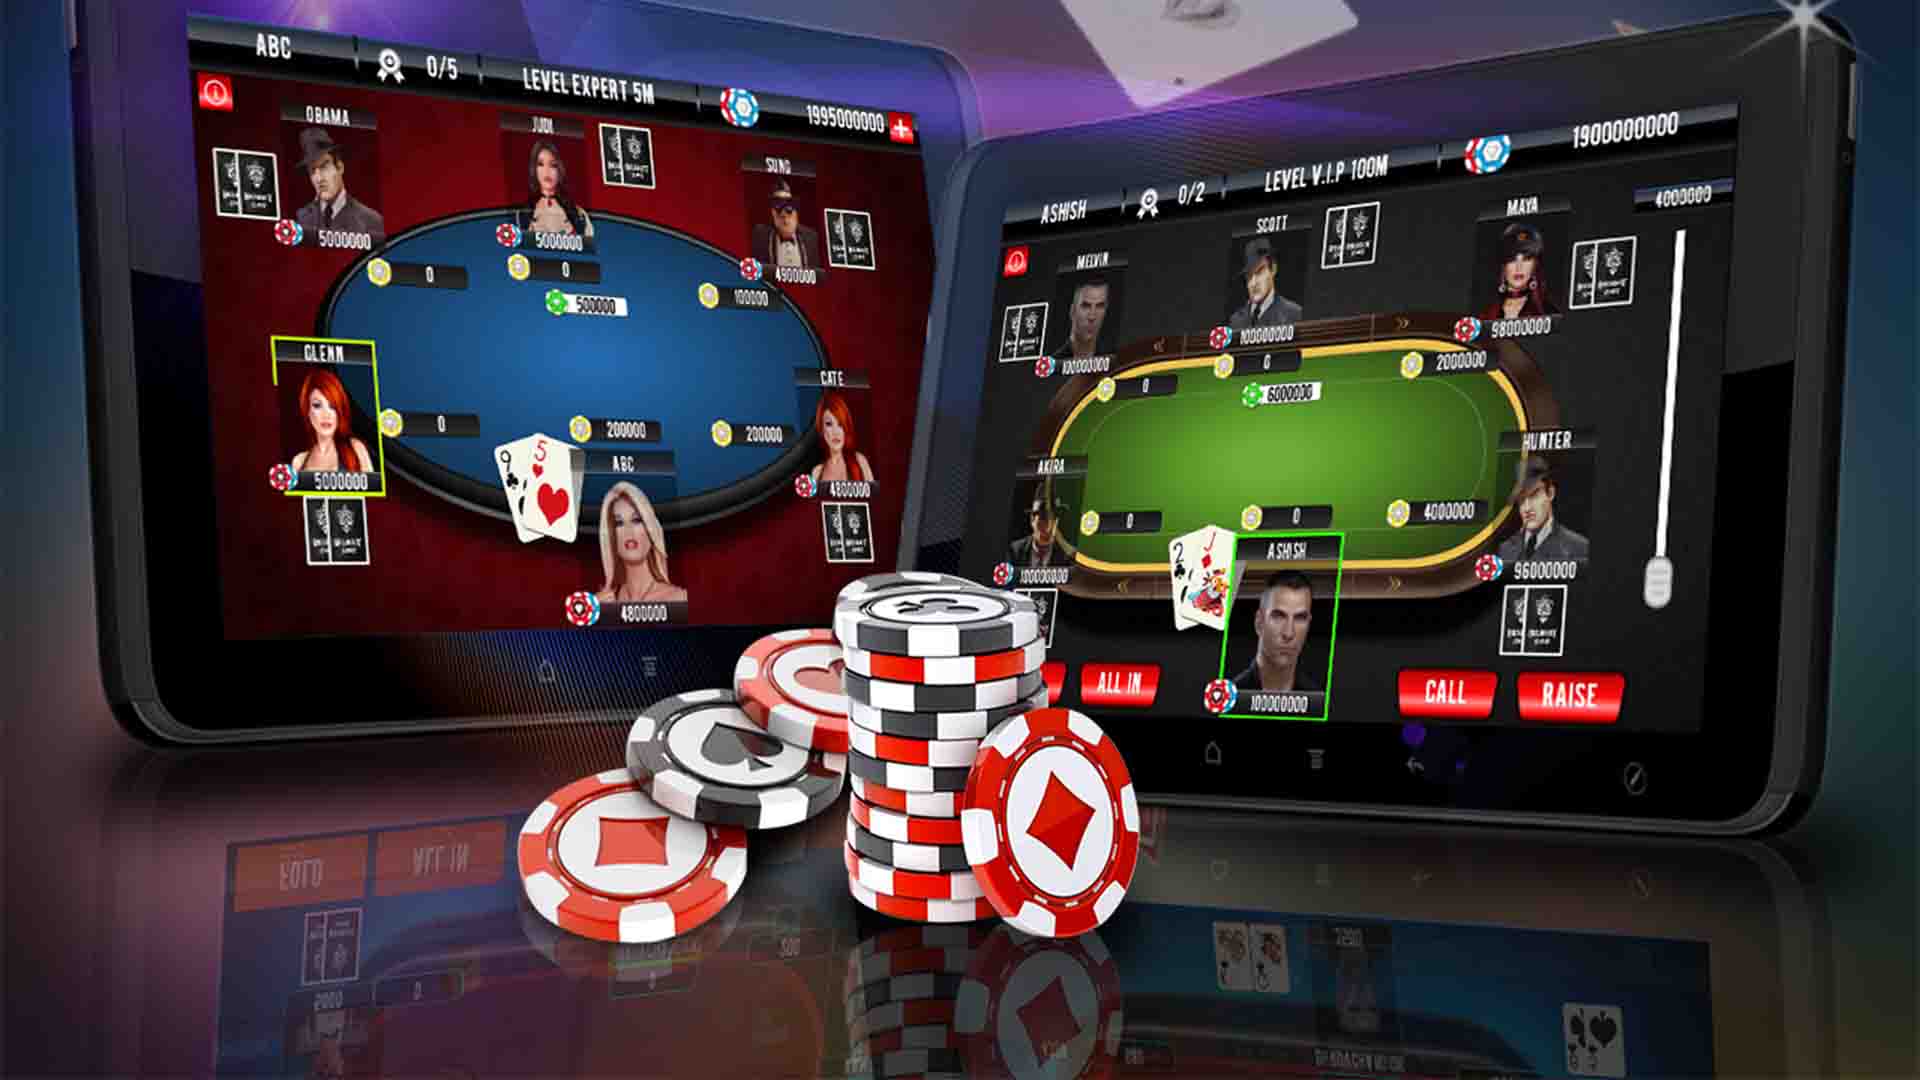 Top 5 reasons for using situs poker online